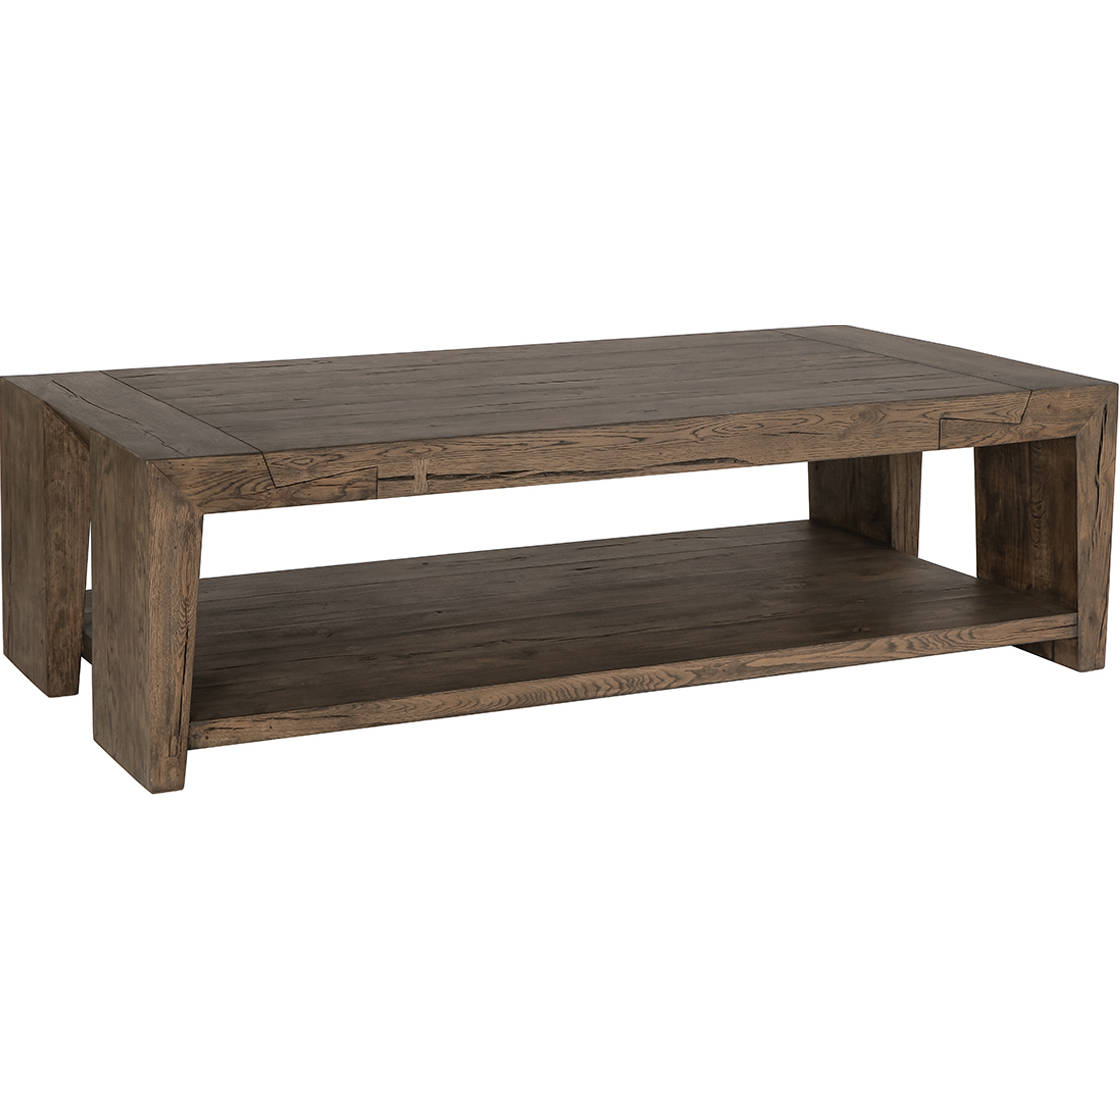 Classic Home 51031326 Troy Coffee Table in Cracked Oak